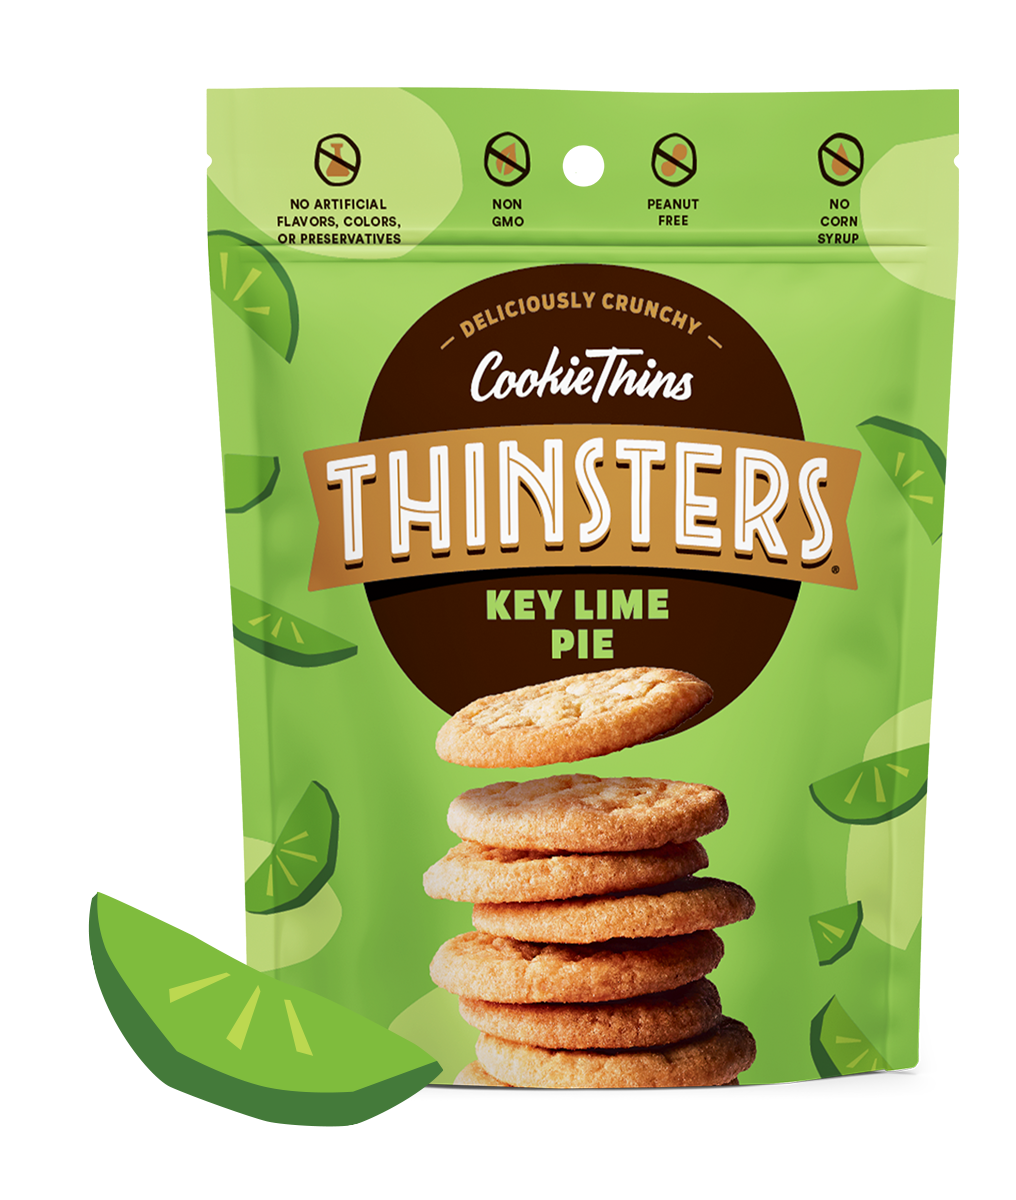 Thinsters Key Lime Pie, 4 oz (6 pack)